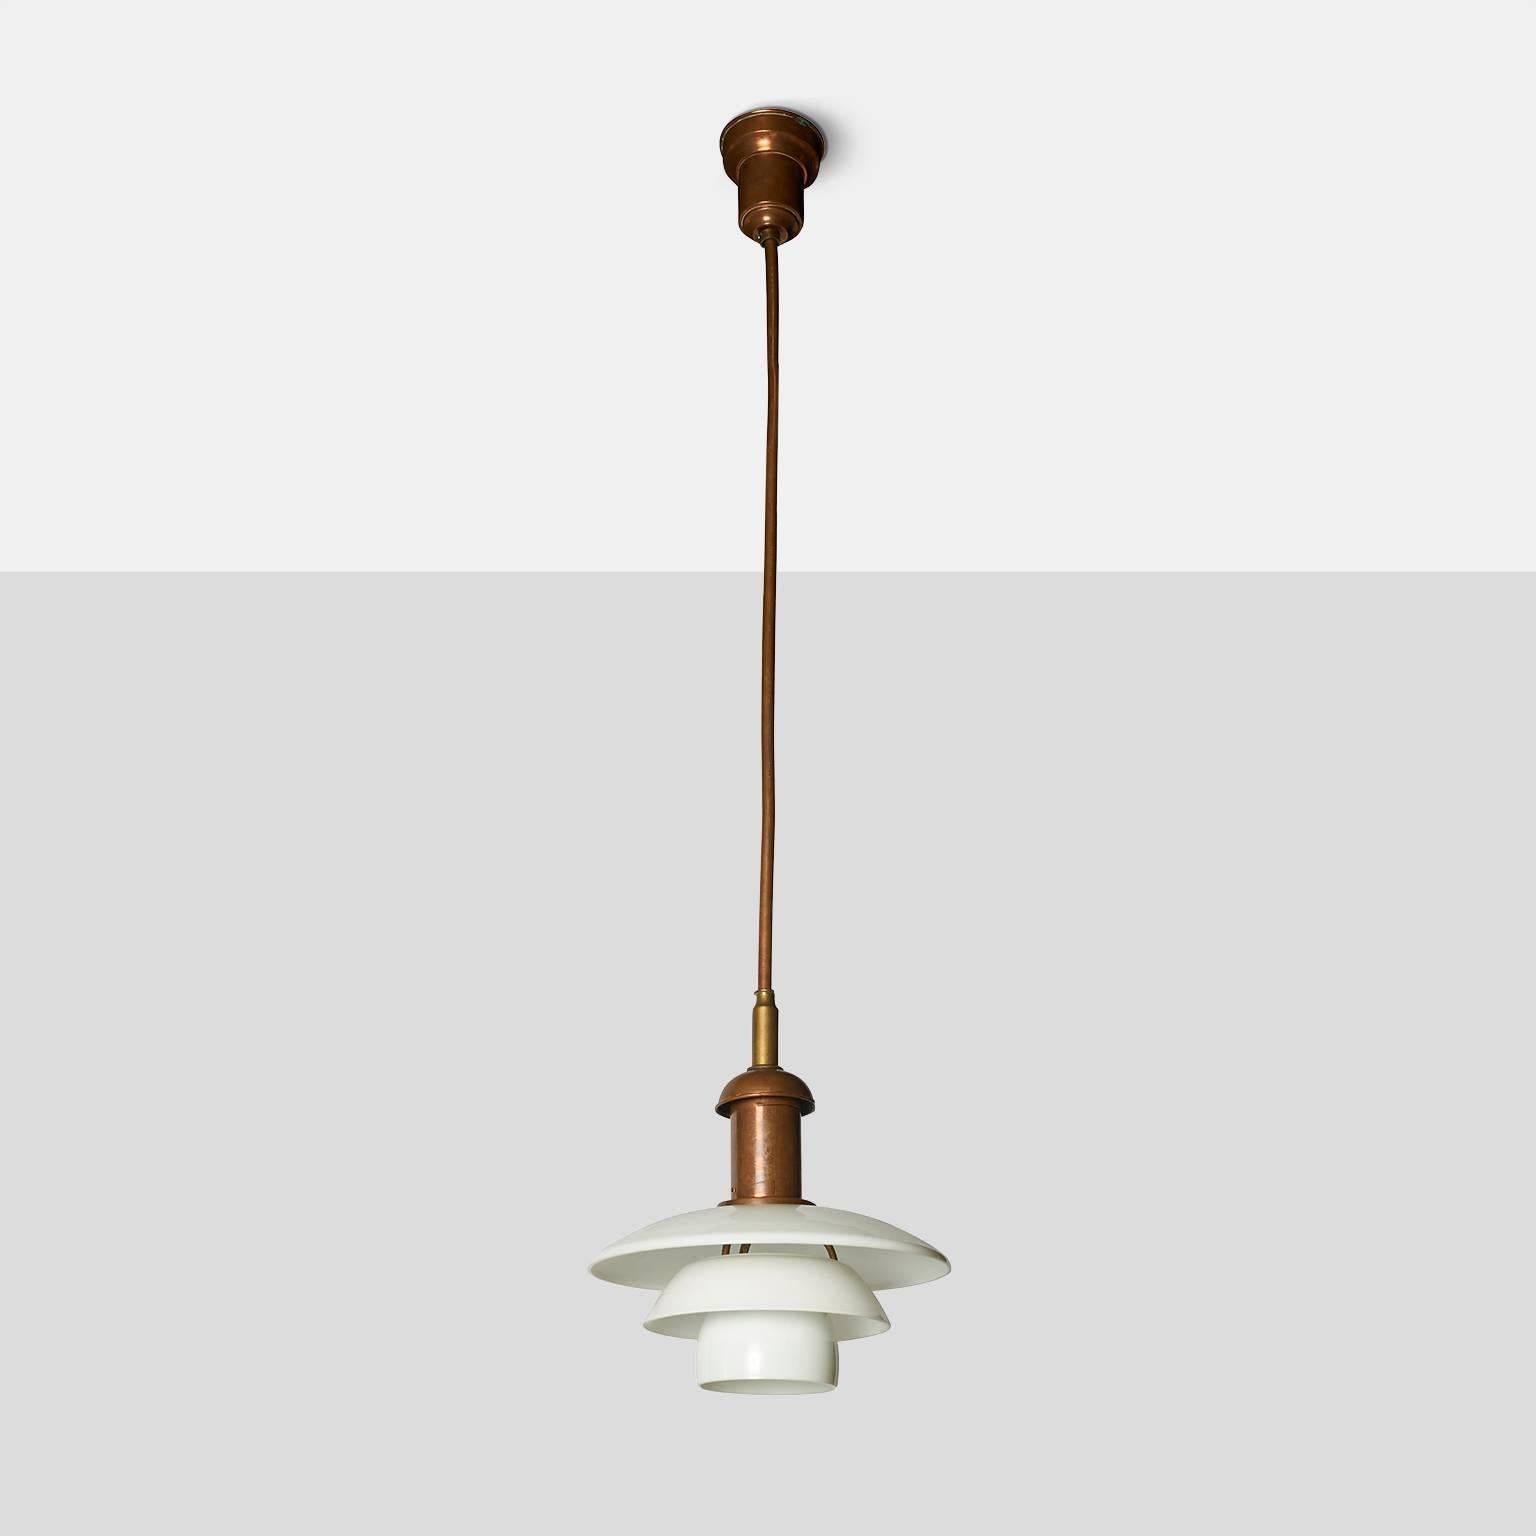 A very rare copper hanging lamp with fixed ceiling rod by Poul Henningsen for Louis Poulsen in 1926.
The pendant has a copper socket cover, stem and canopy and is fitted with opal glass, 3/3 shade set.
Denmark, circa 1926.